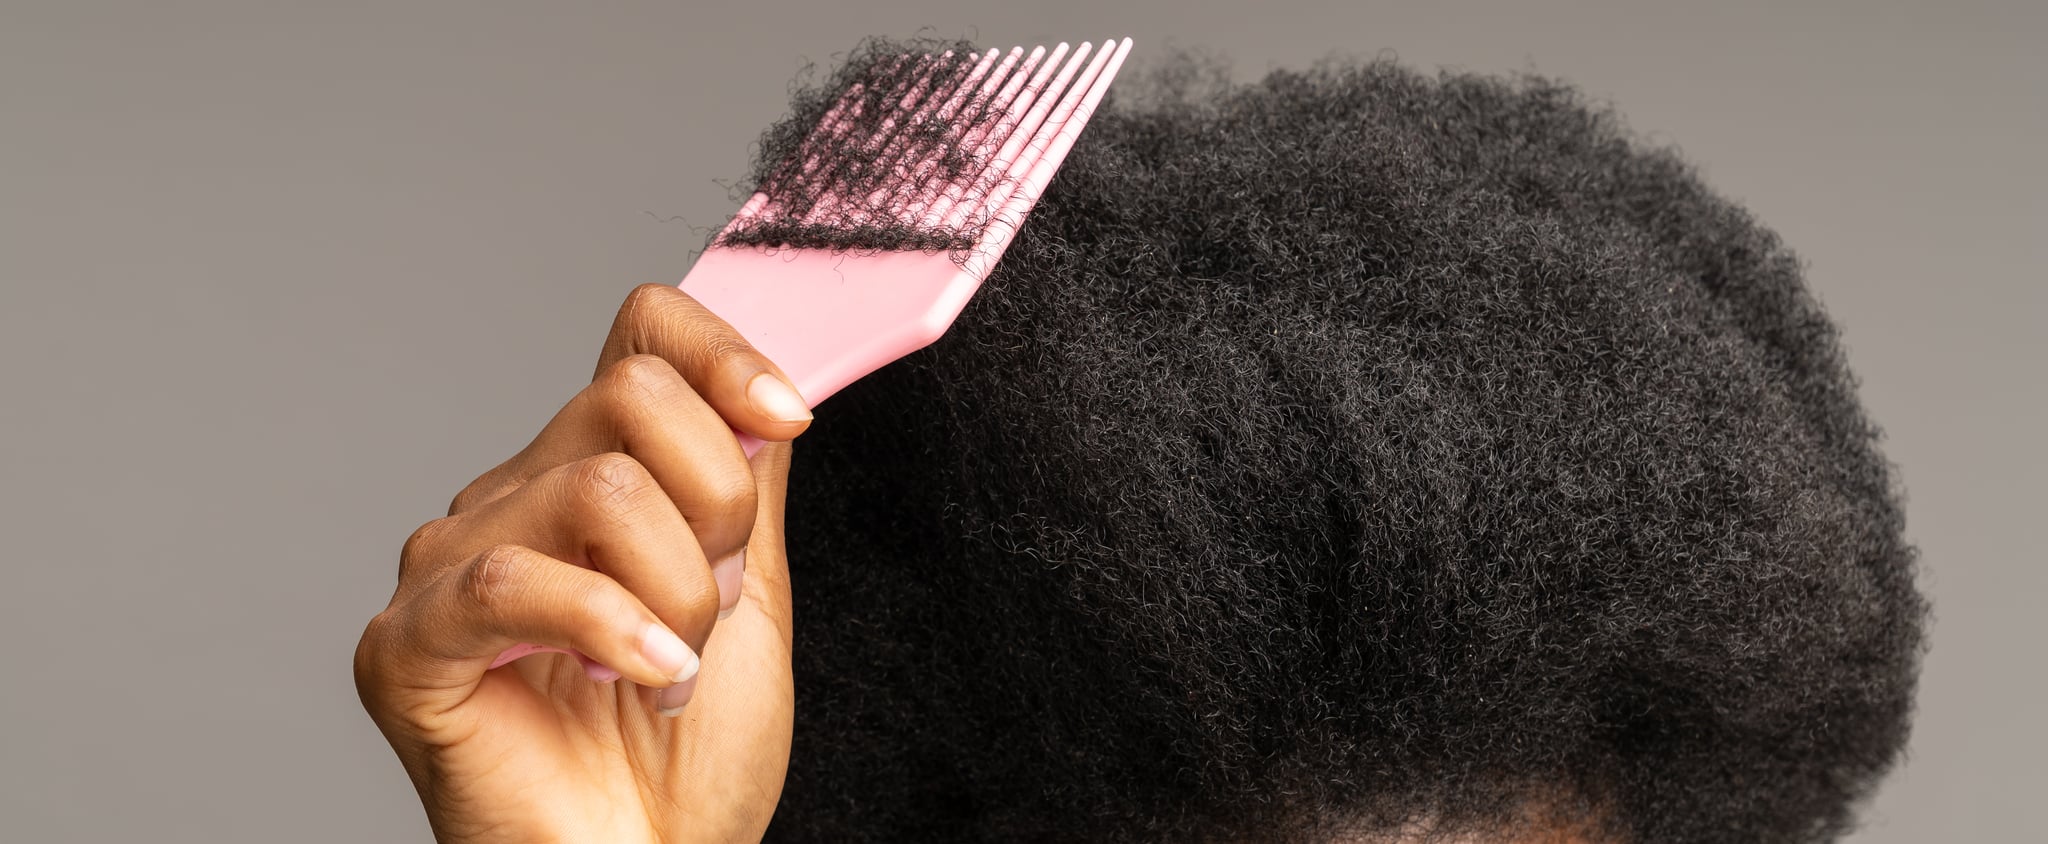 How White Hairstylists Can Better Serve Black Clients